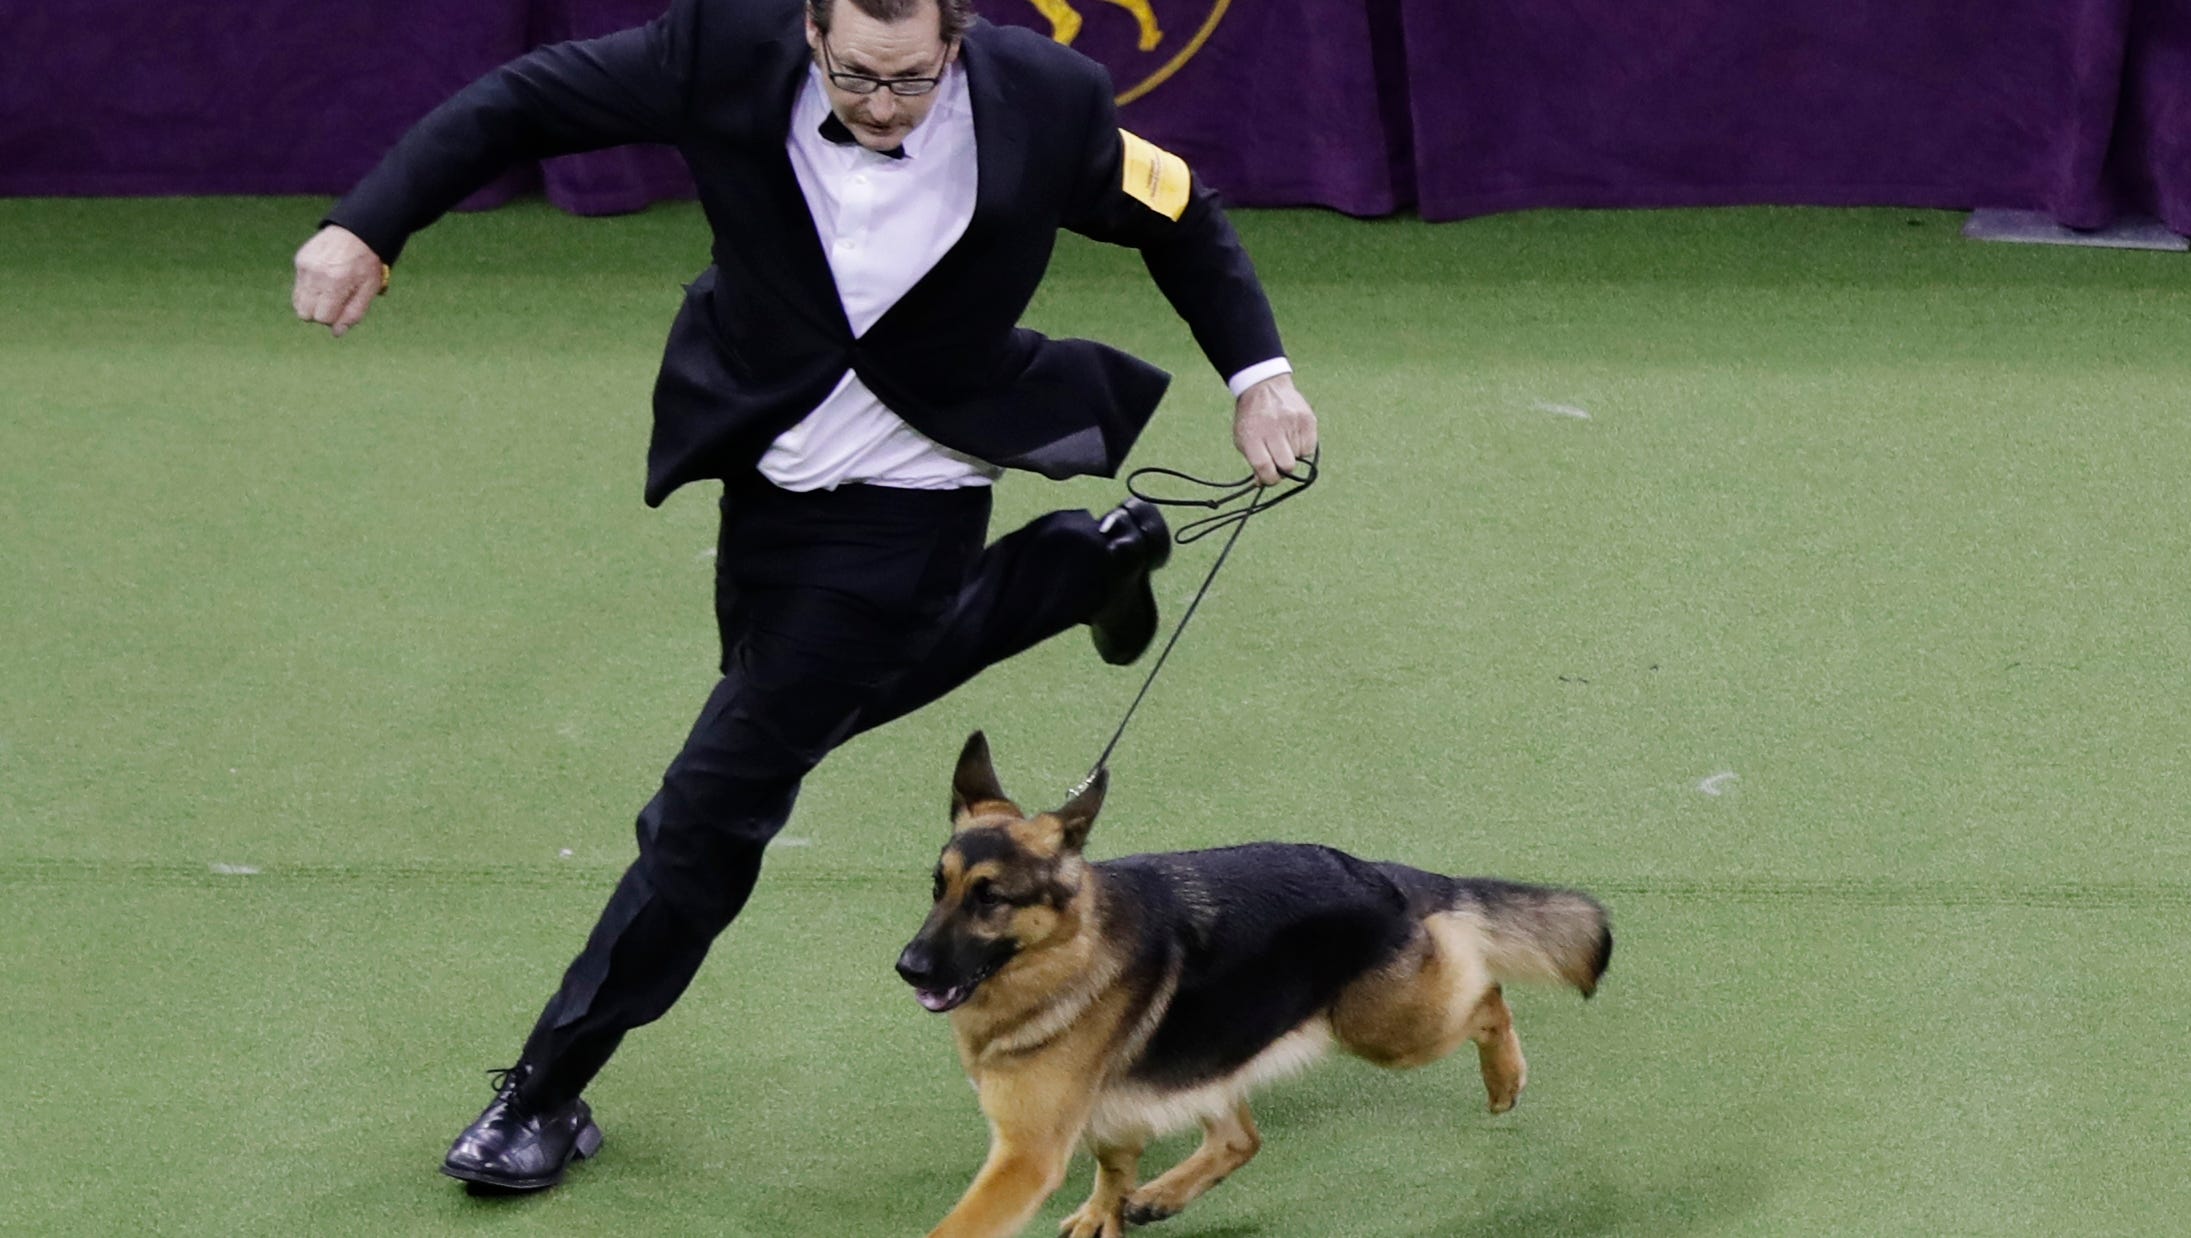 Wisconsin German Shepherd Named Rumor Wins Best In Show At 141st Westminster Kennel Club Dog Show